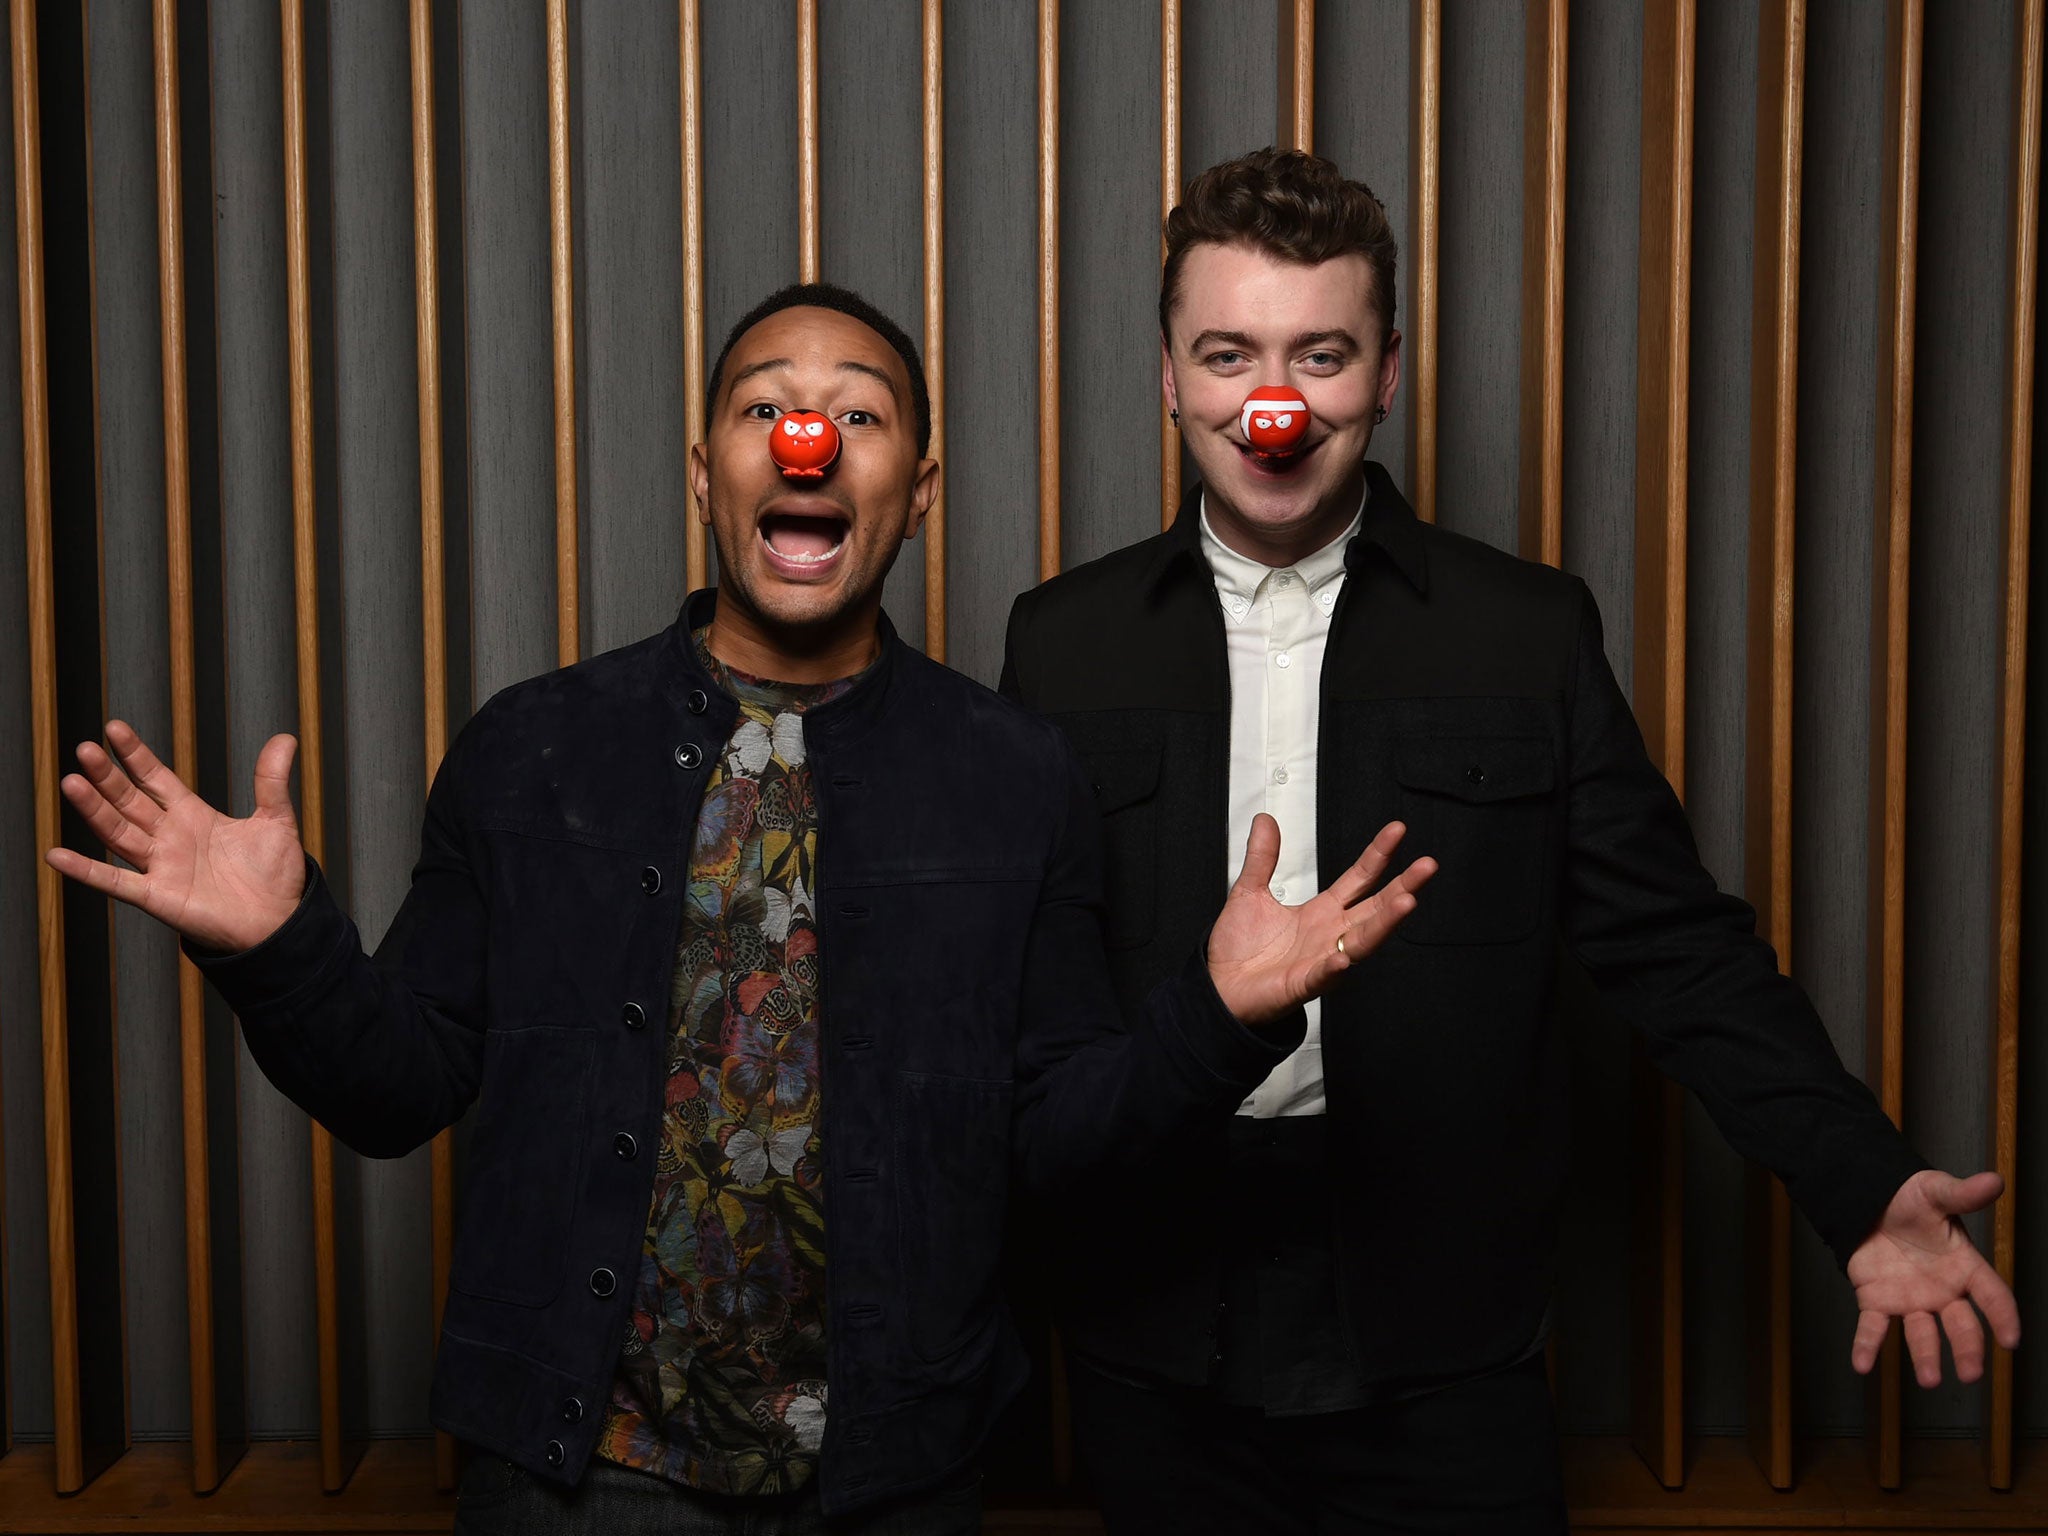 Sam Smith and John Legend have collaborated on the official Red Nose Day single